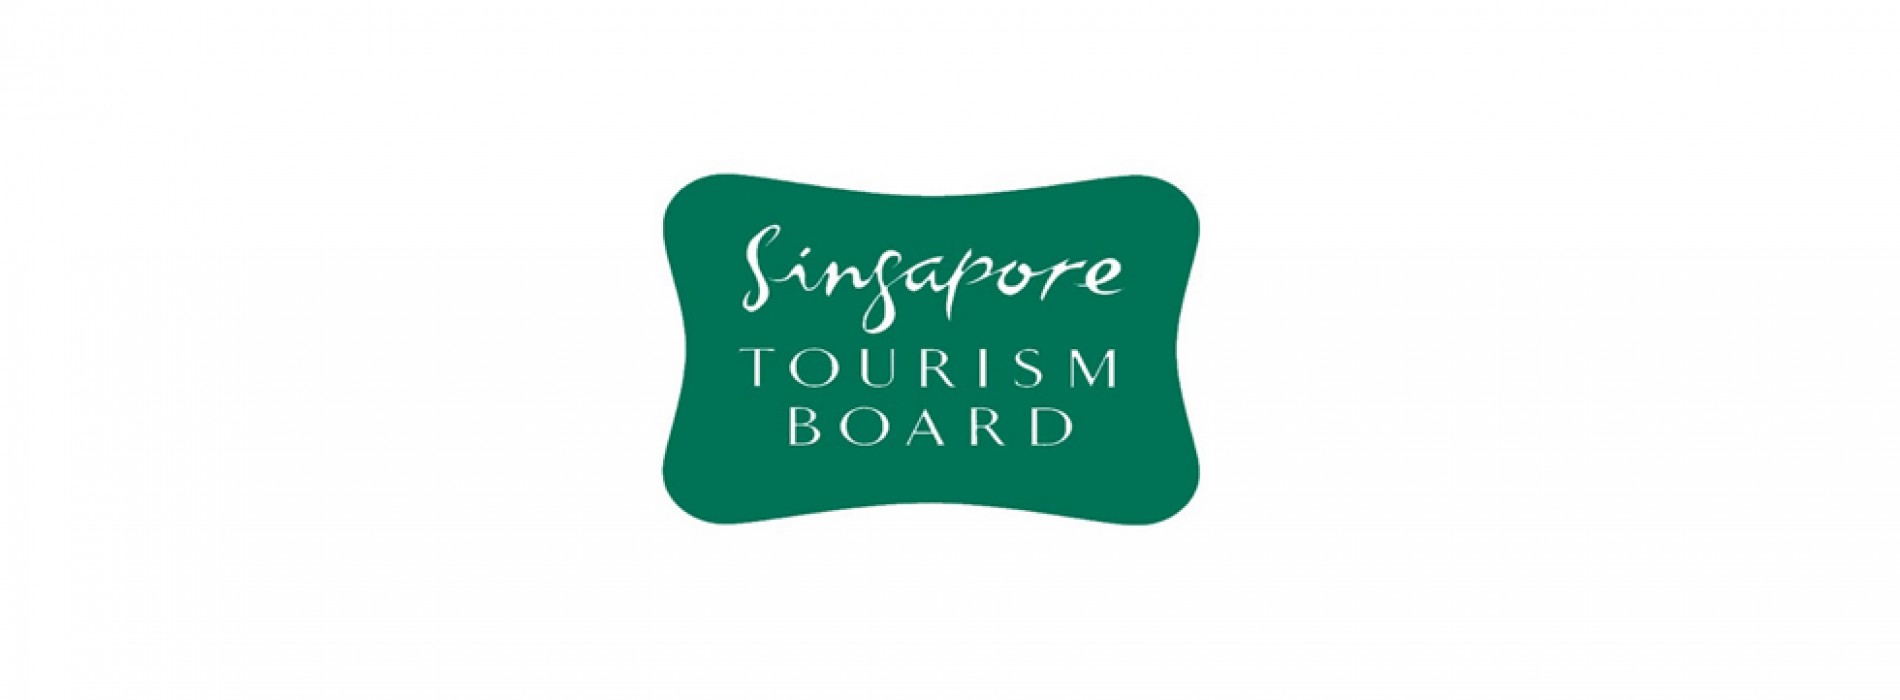 Singapore Tourism Board brings ‘Passion made Possible’ to life with the Singapore Weekender at Mumbai’s Sassoon Docks